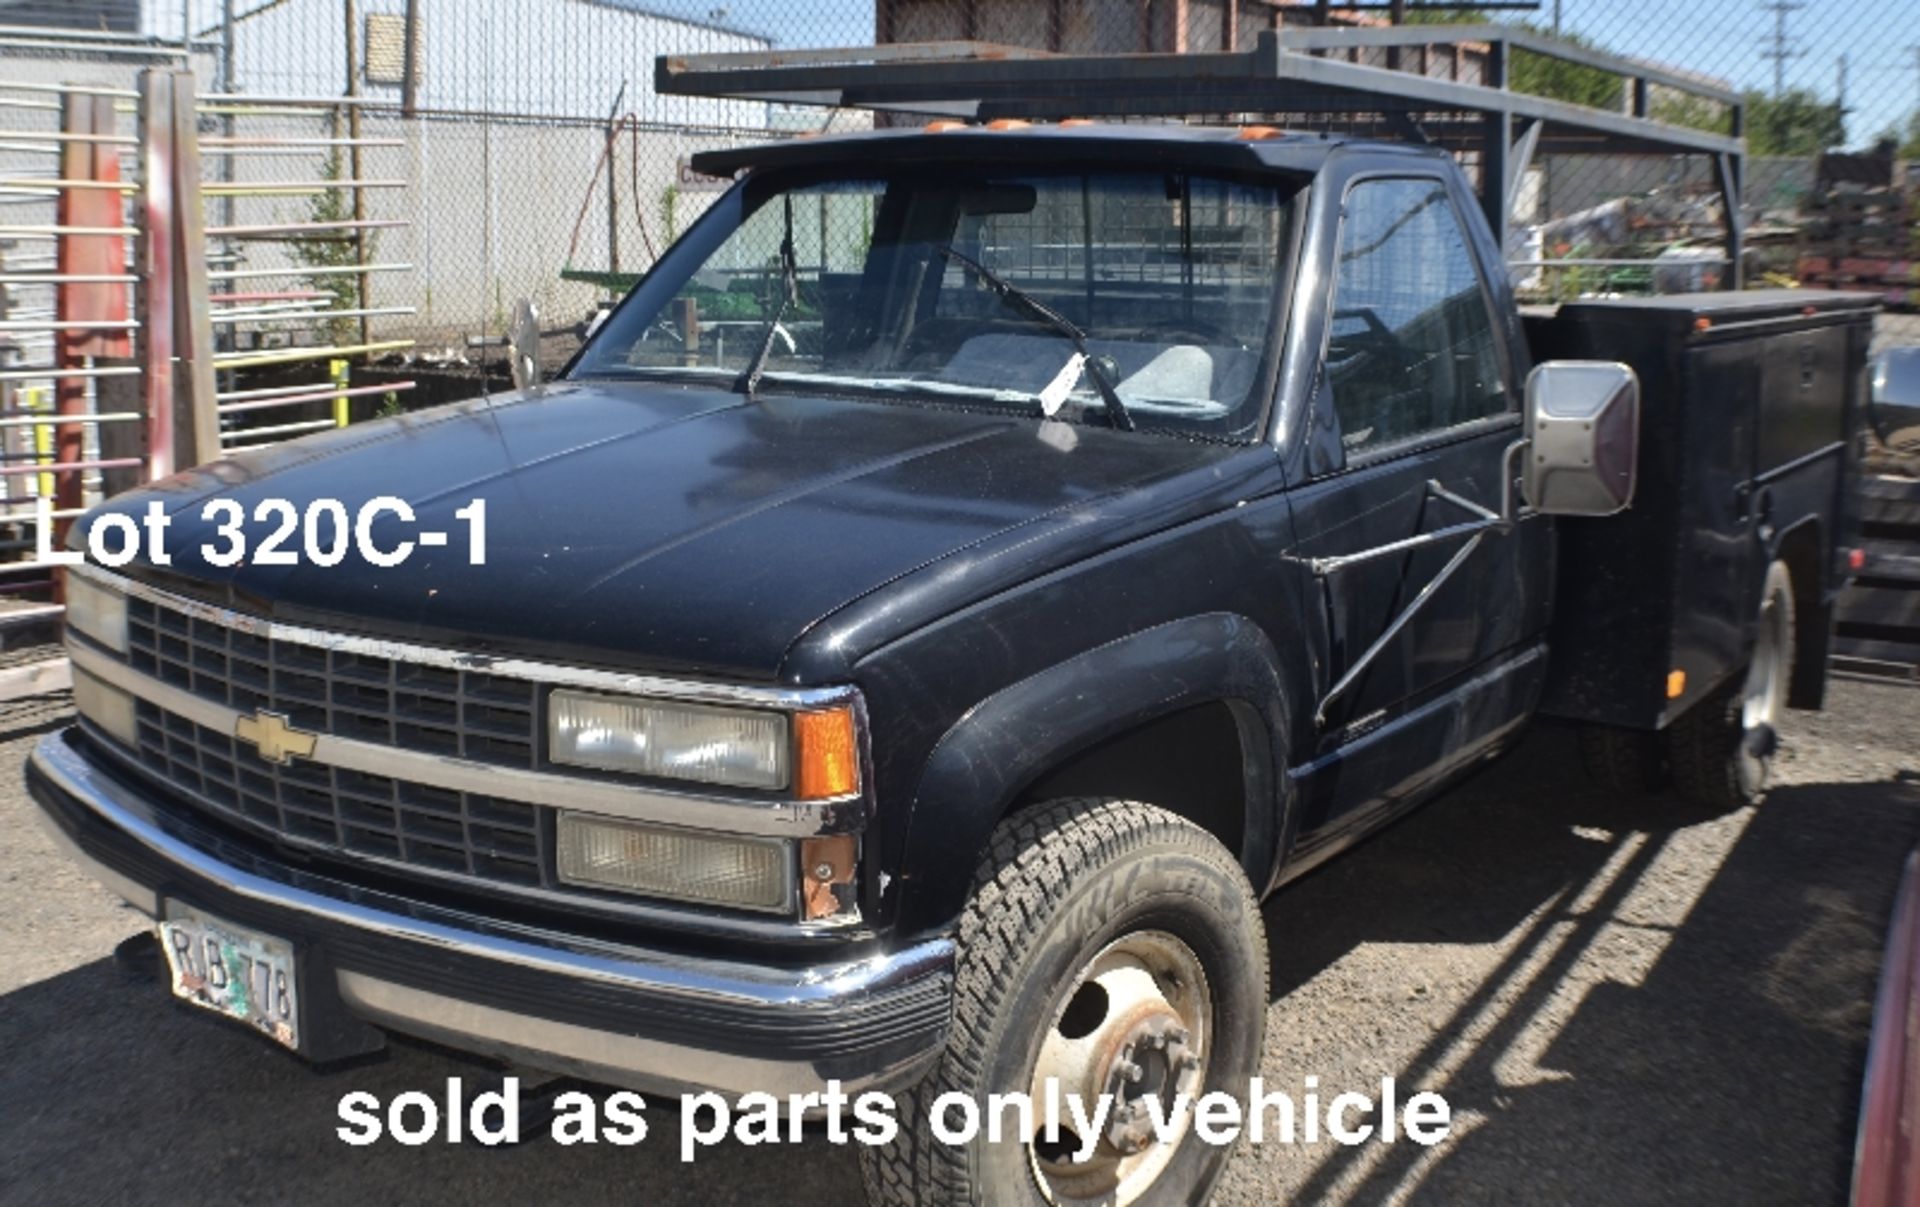 1990 Chevrolet Silverado 3500 Truck with utility bed. 166,719 miles showing, Auto trans,